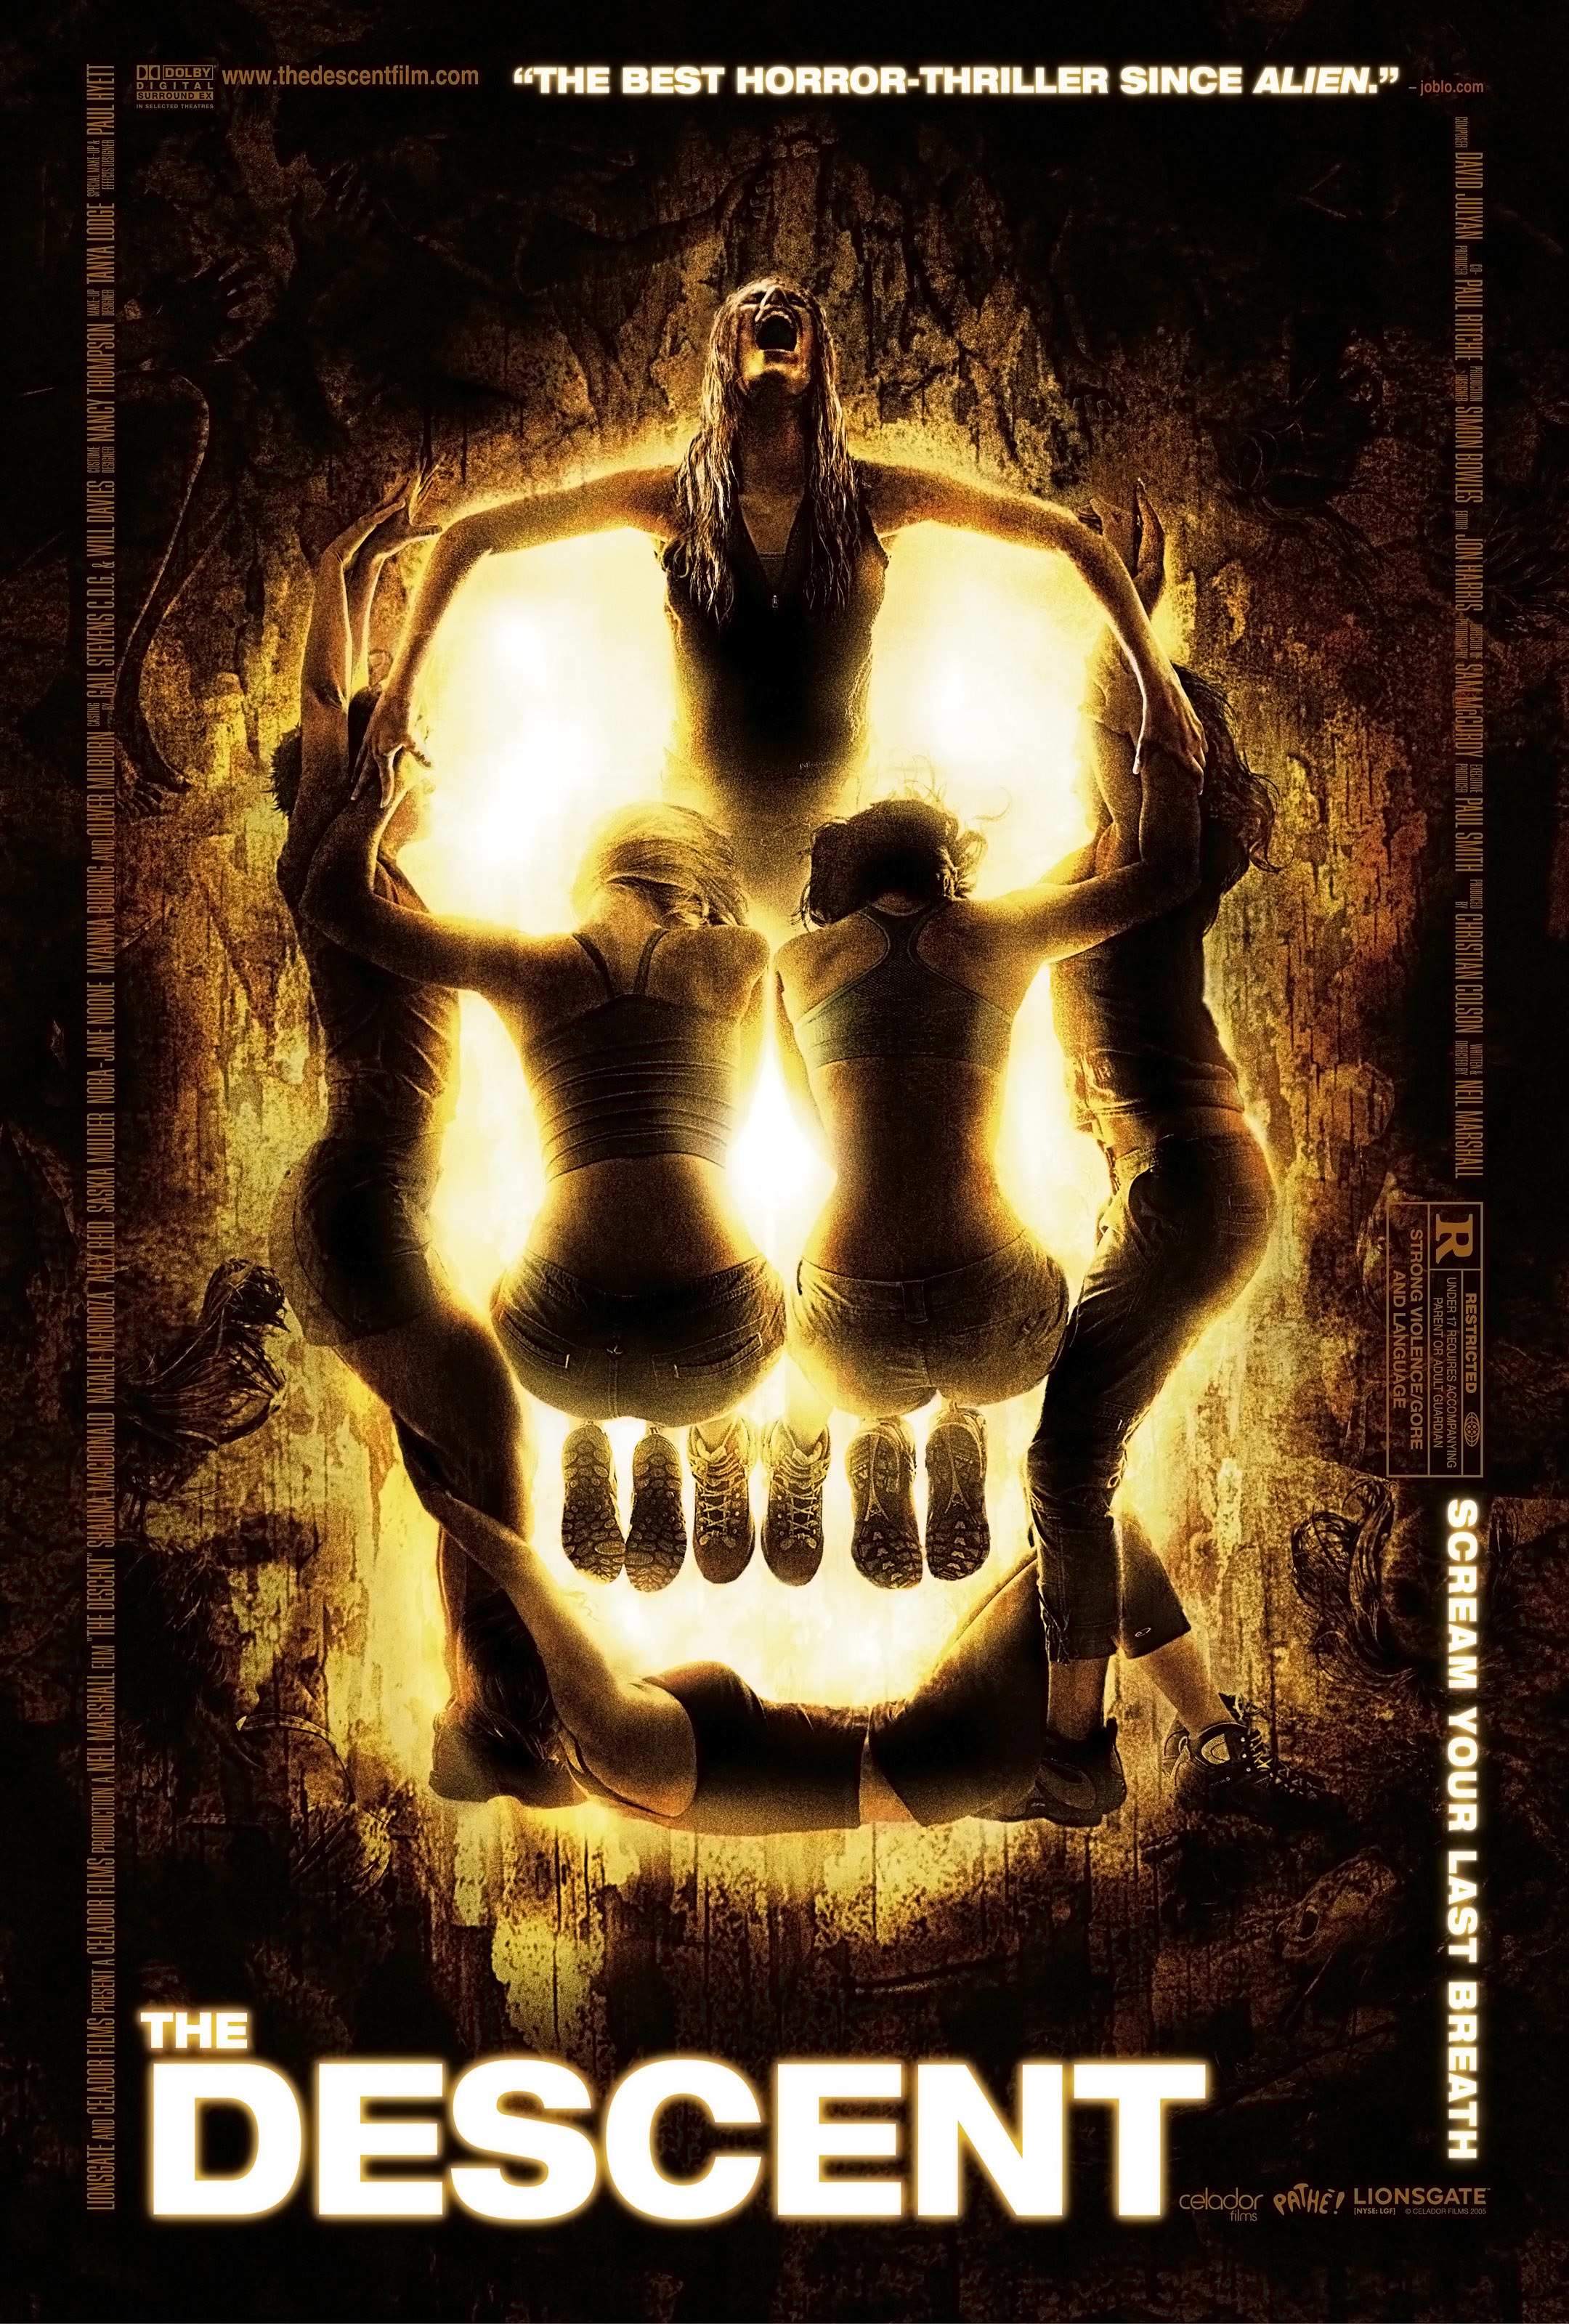 The official poster for &quot;The Descent&quot; featuring six women in formation to form a skull